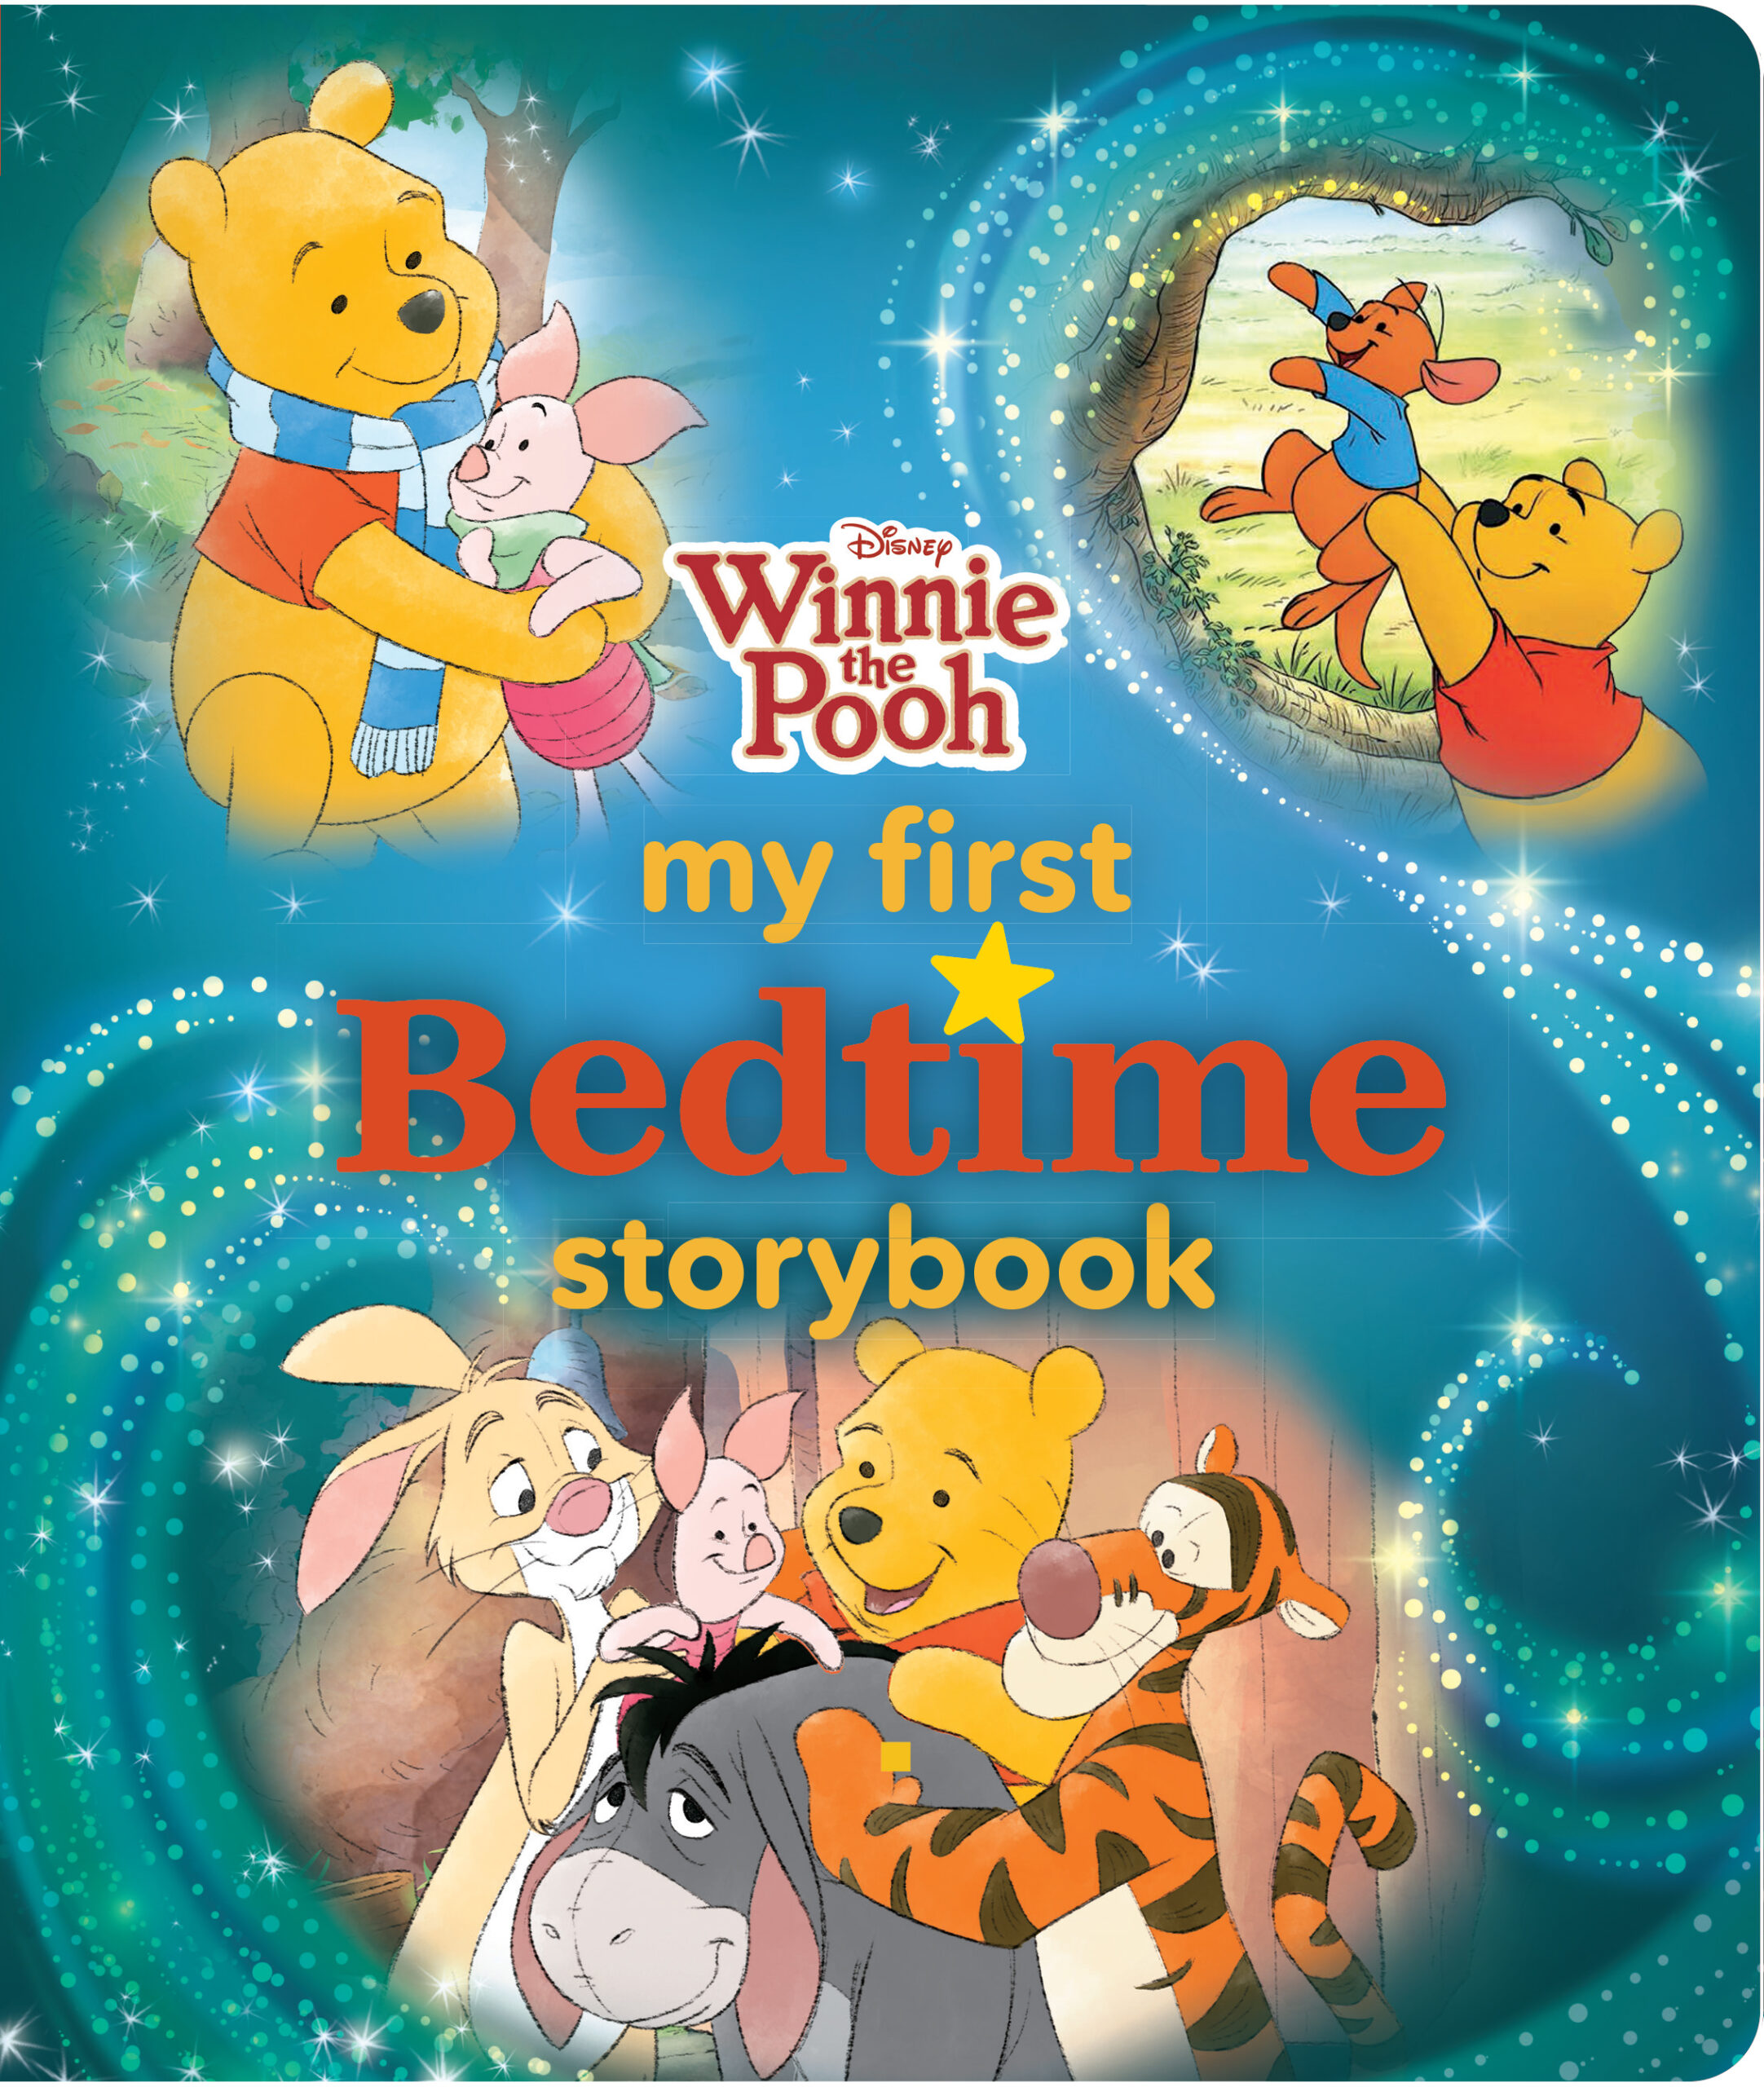 Winnie the Pooh My First Bedtime Storybook by Disney Books Disney